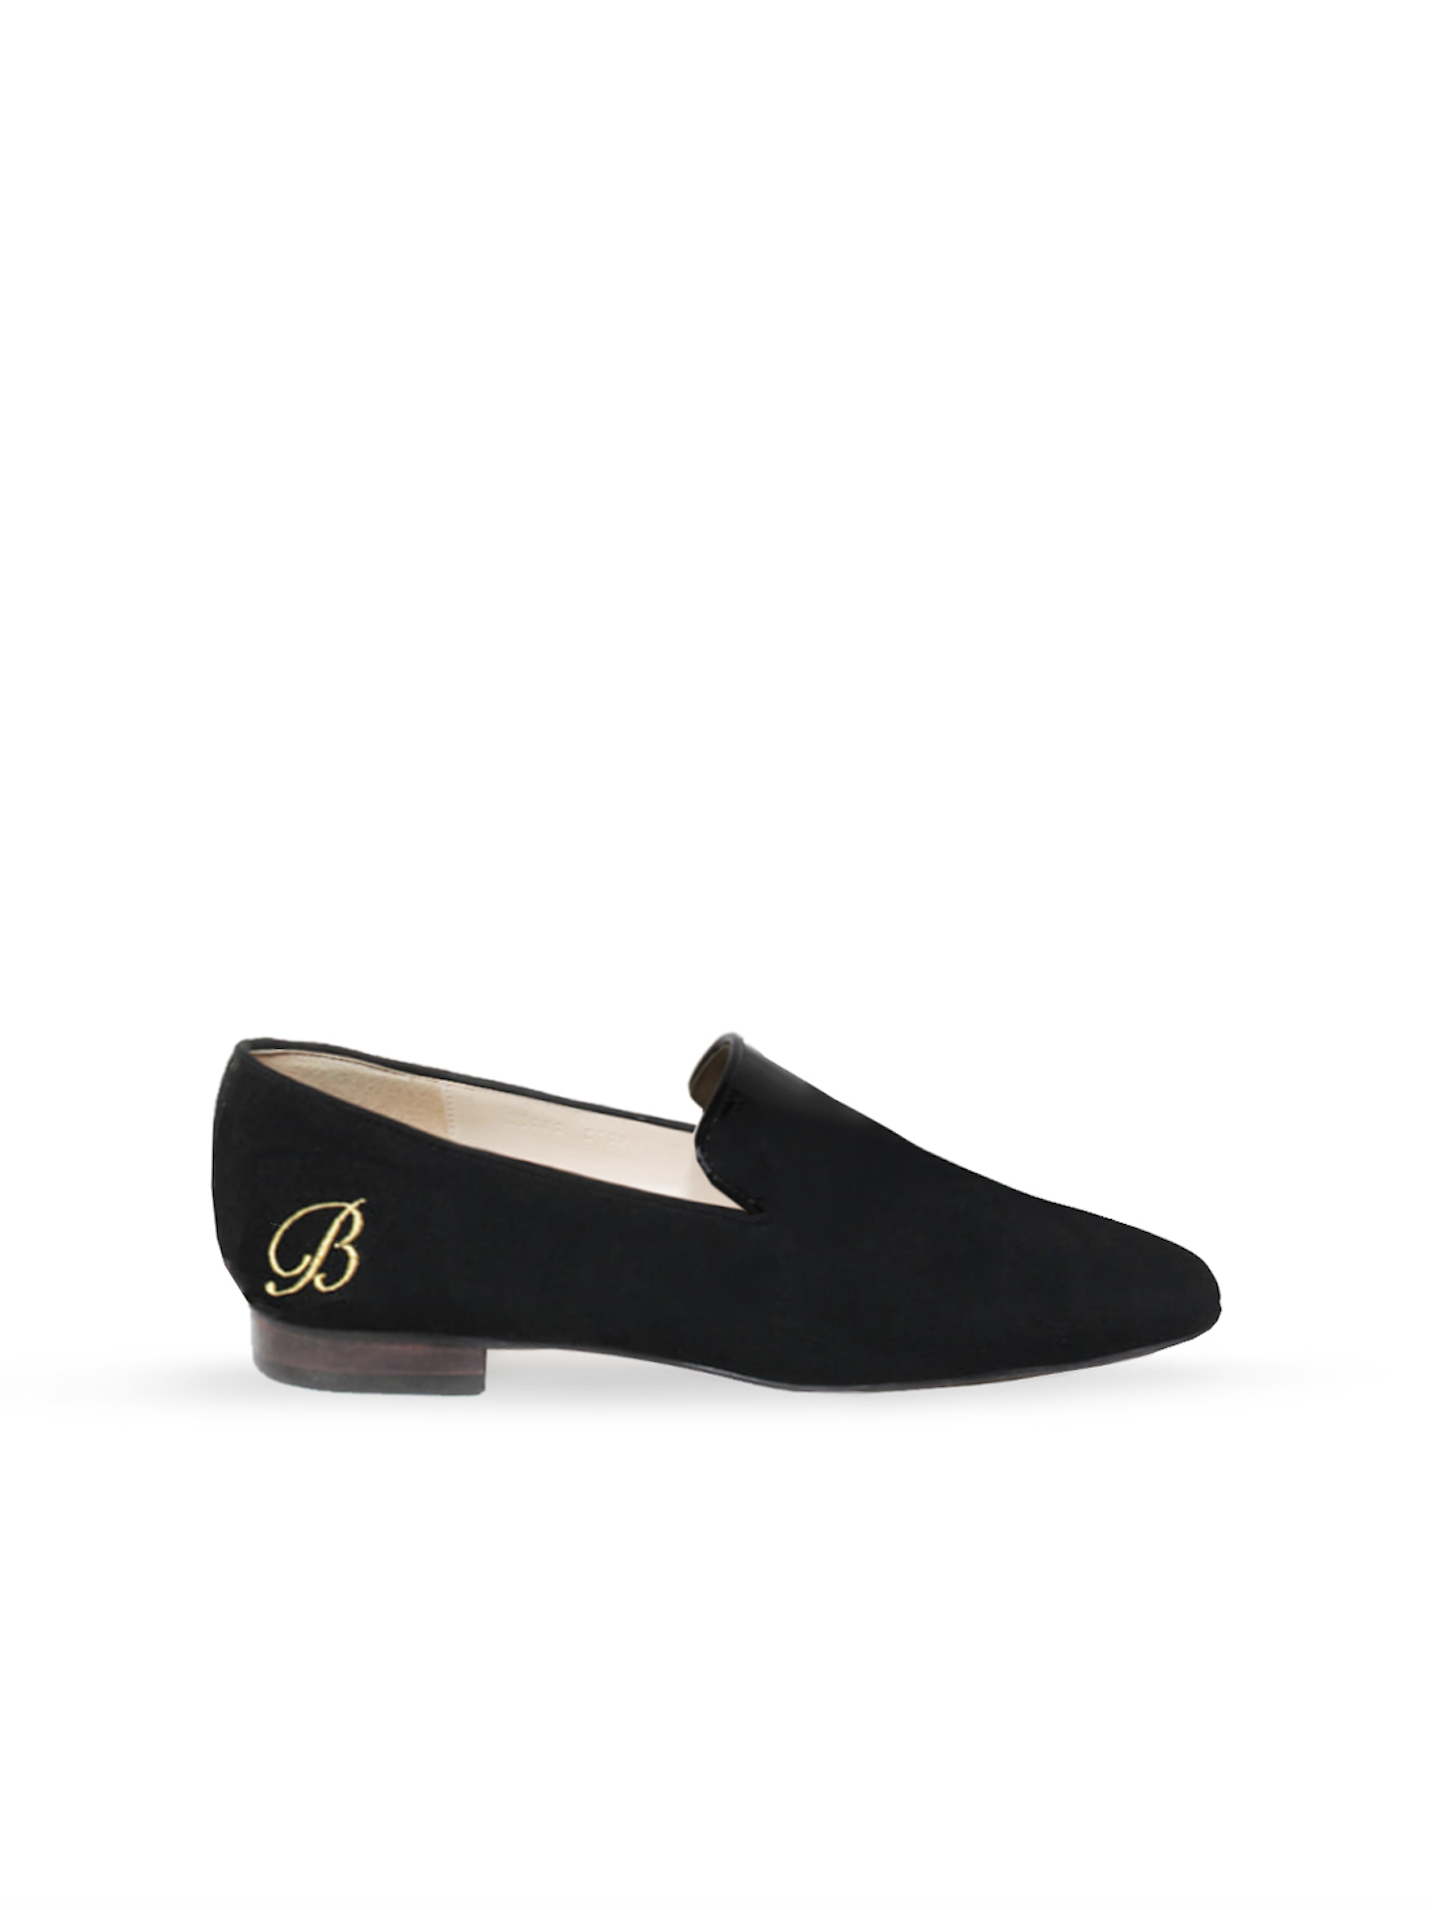 B initial loafer - black